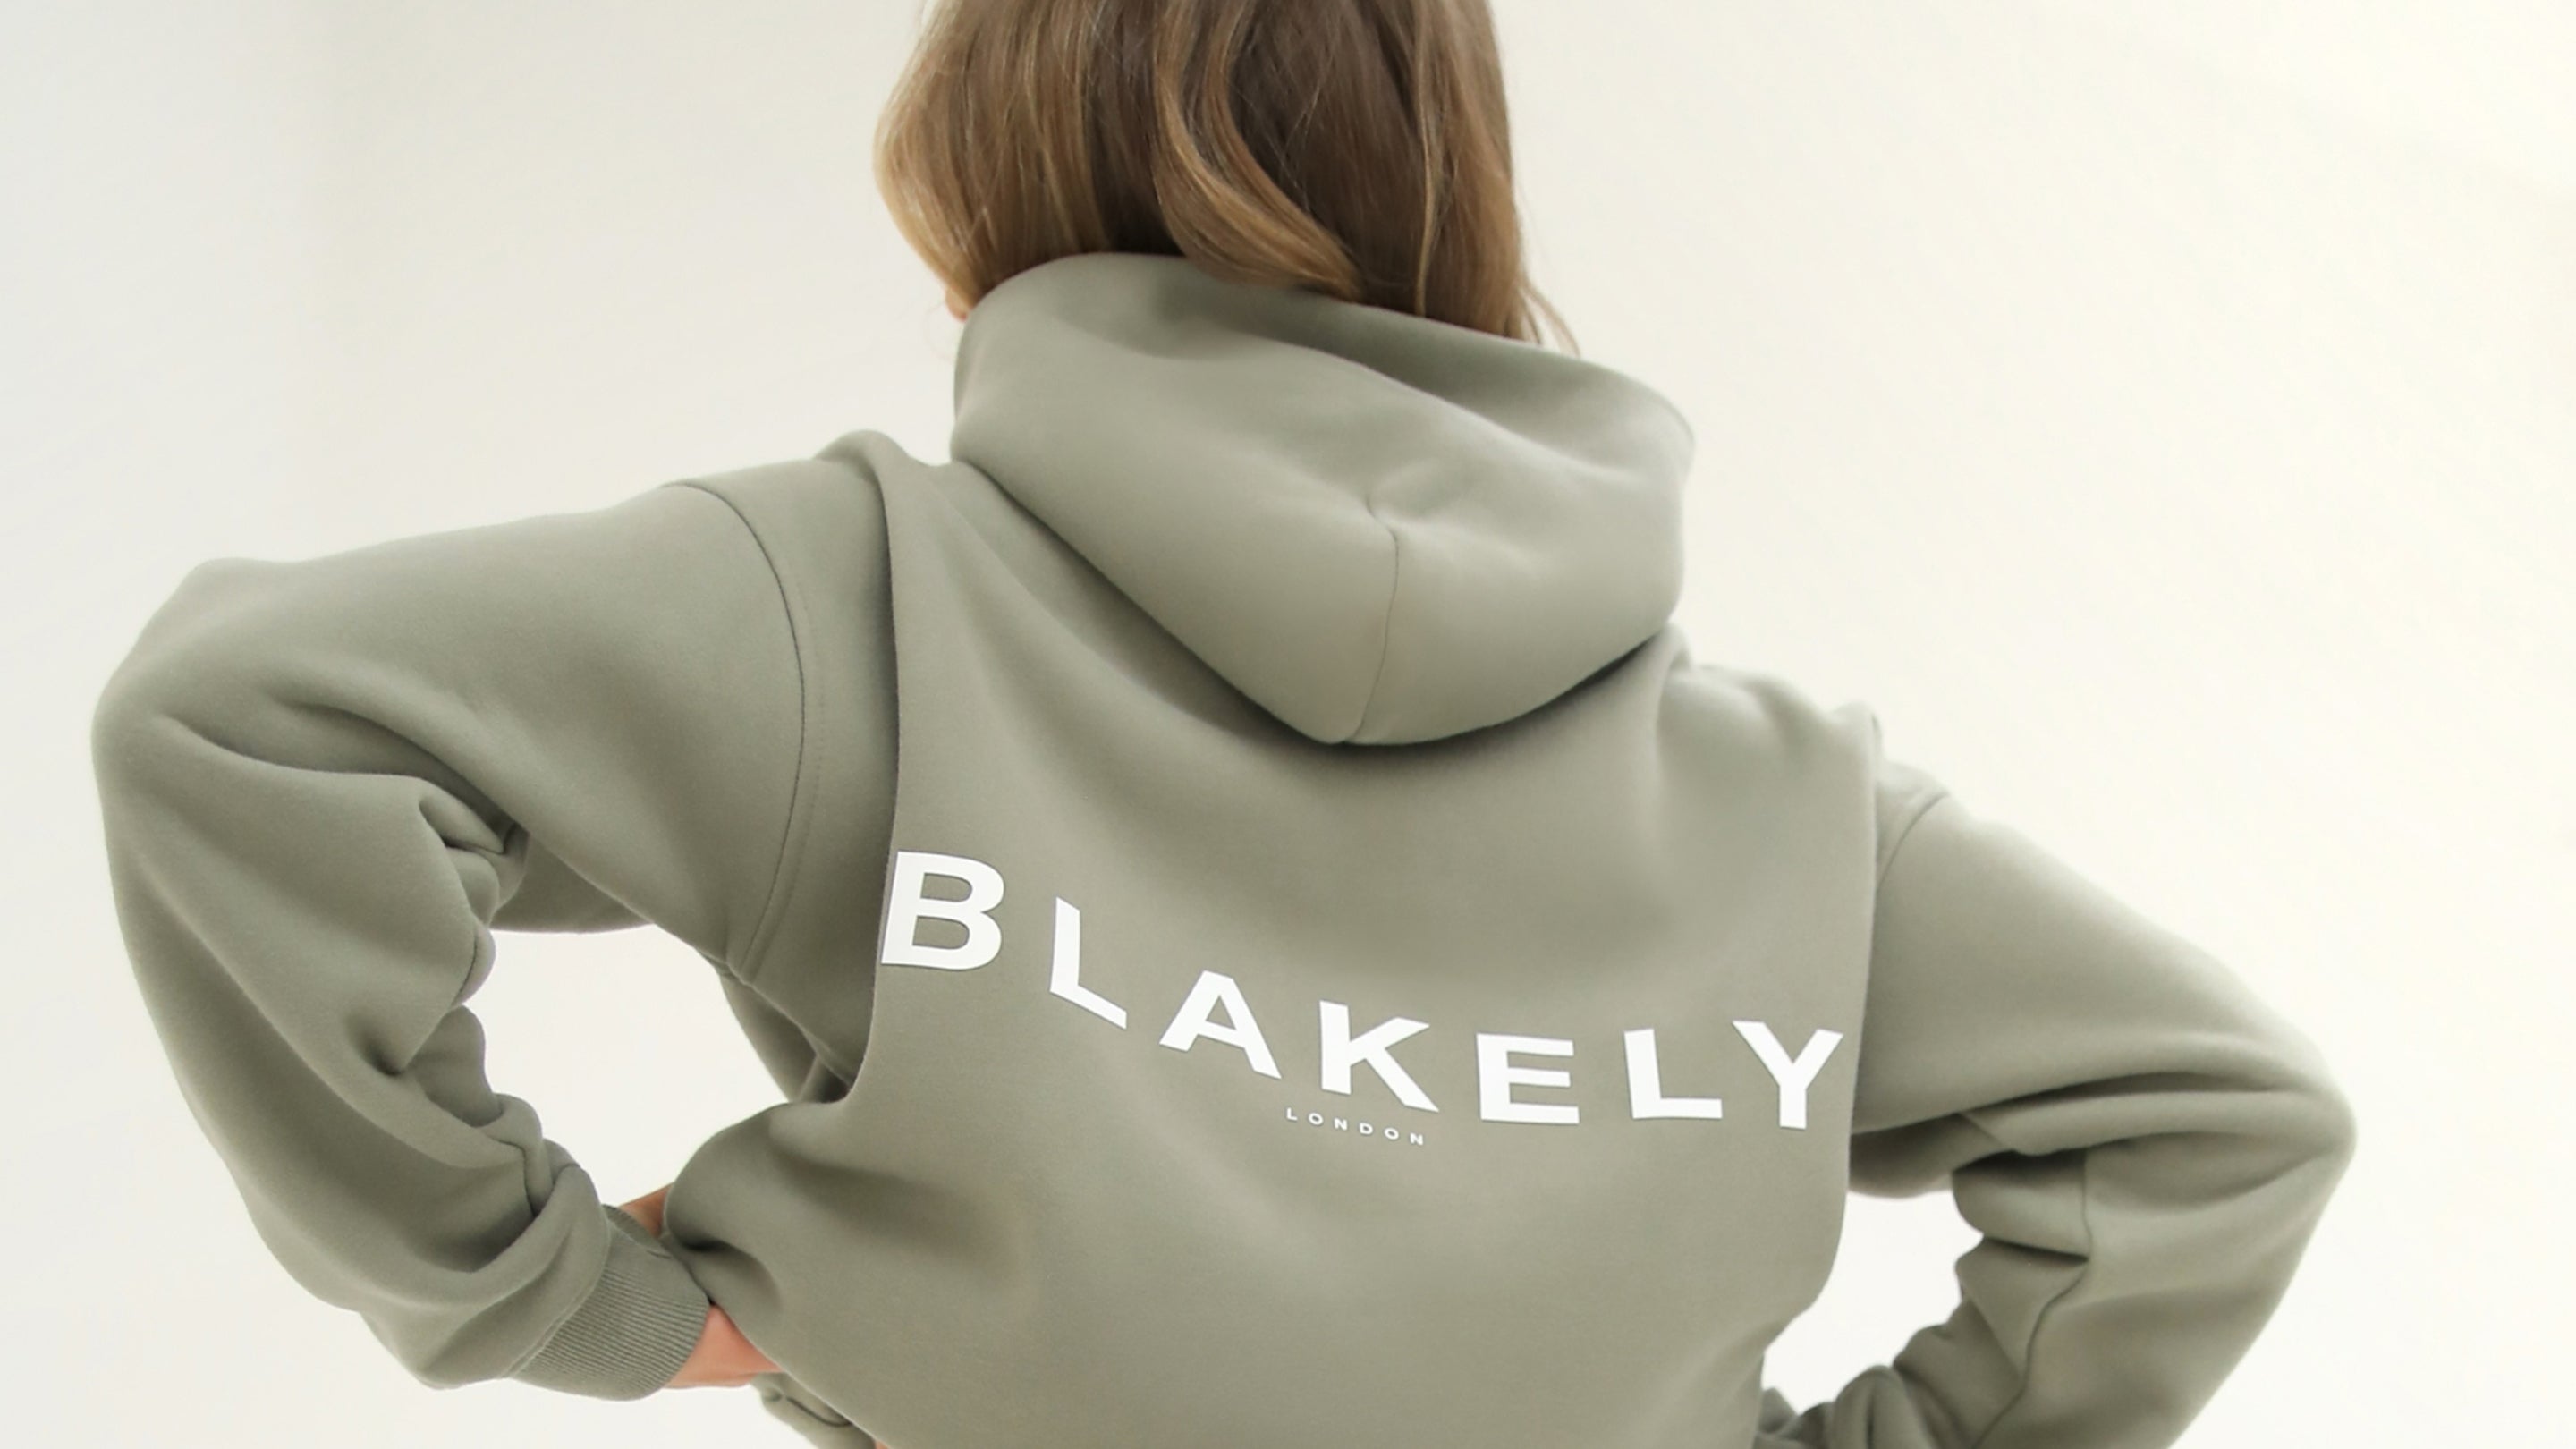 The Blakely London Collection